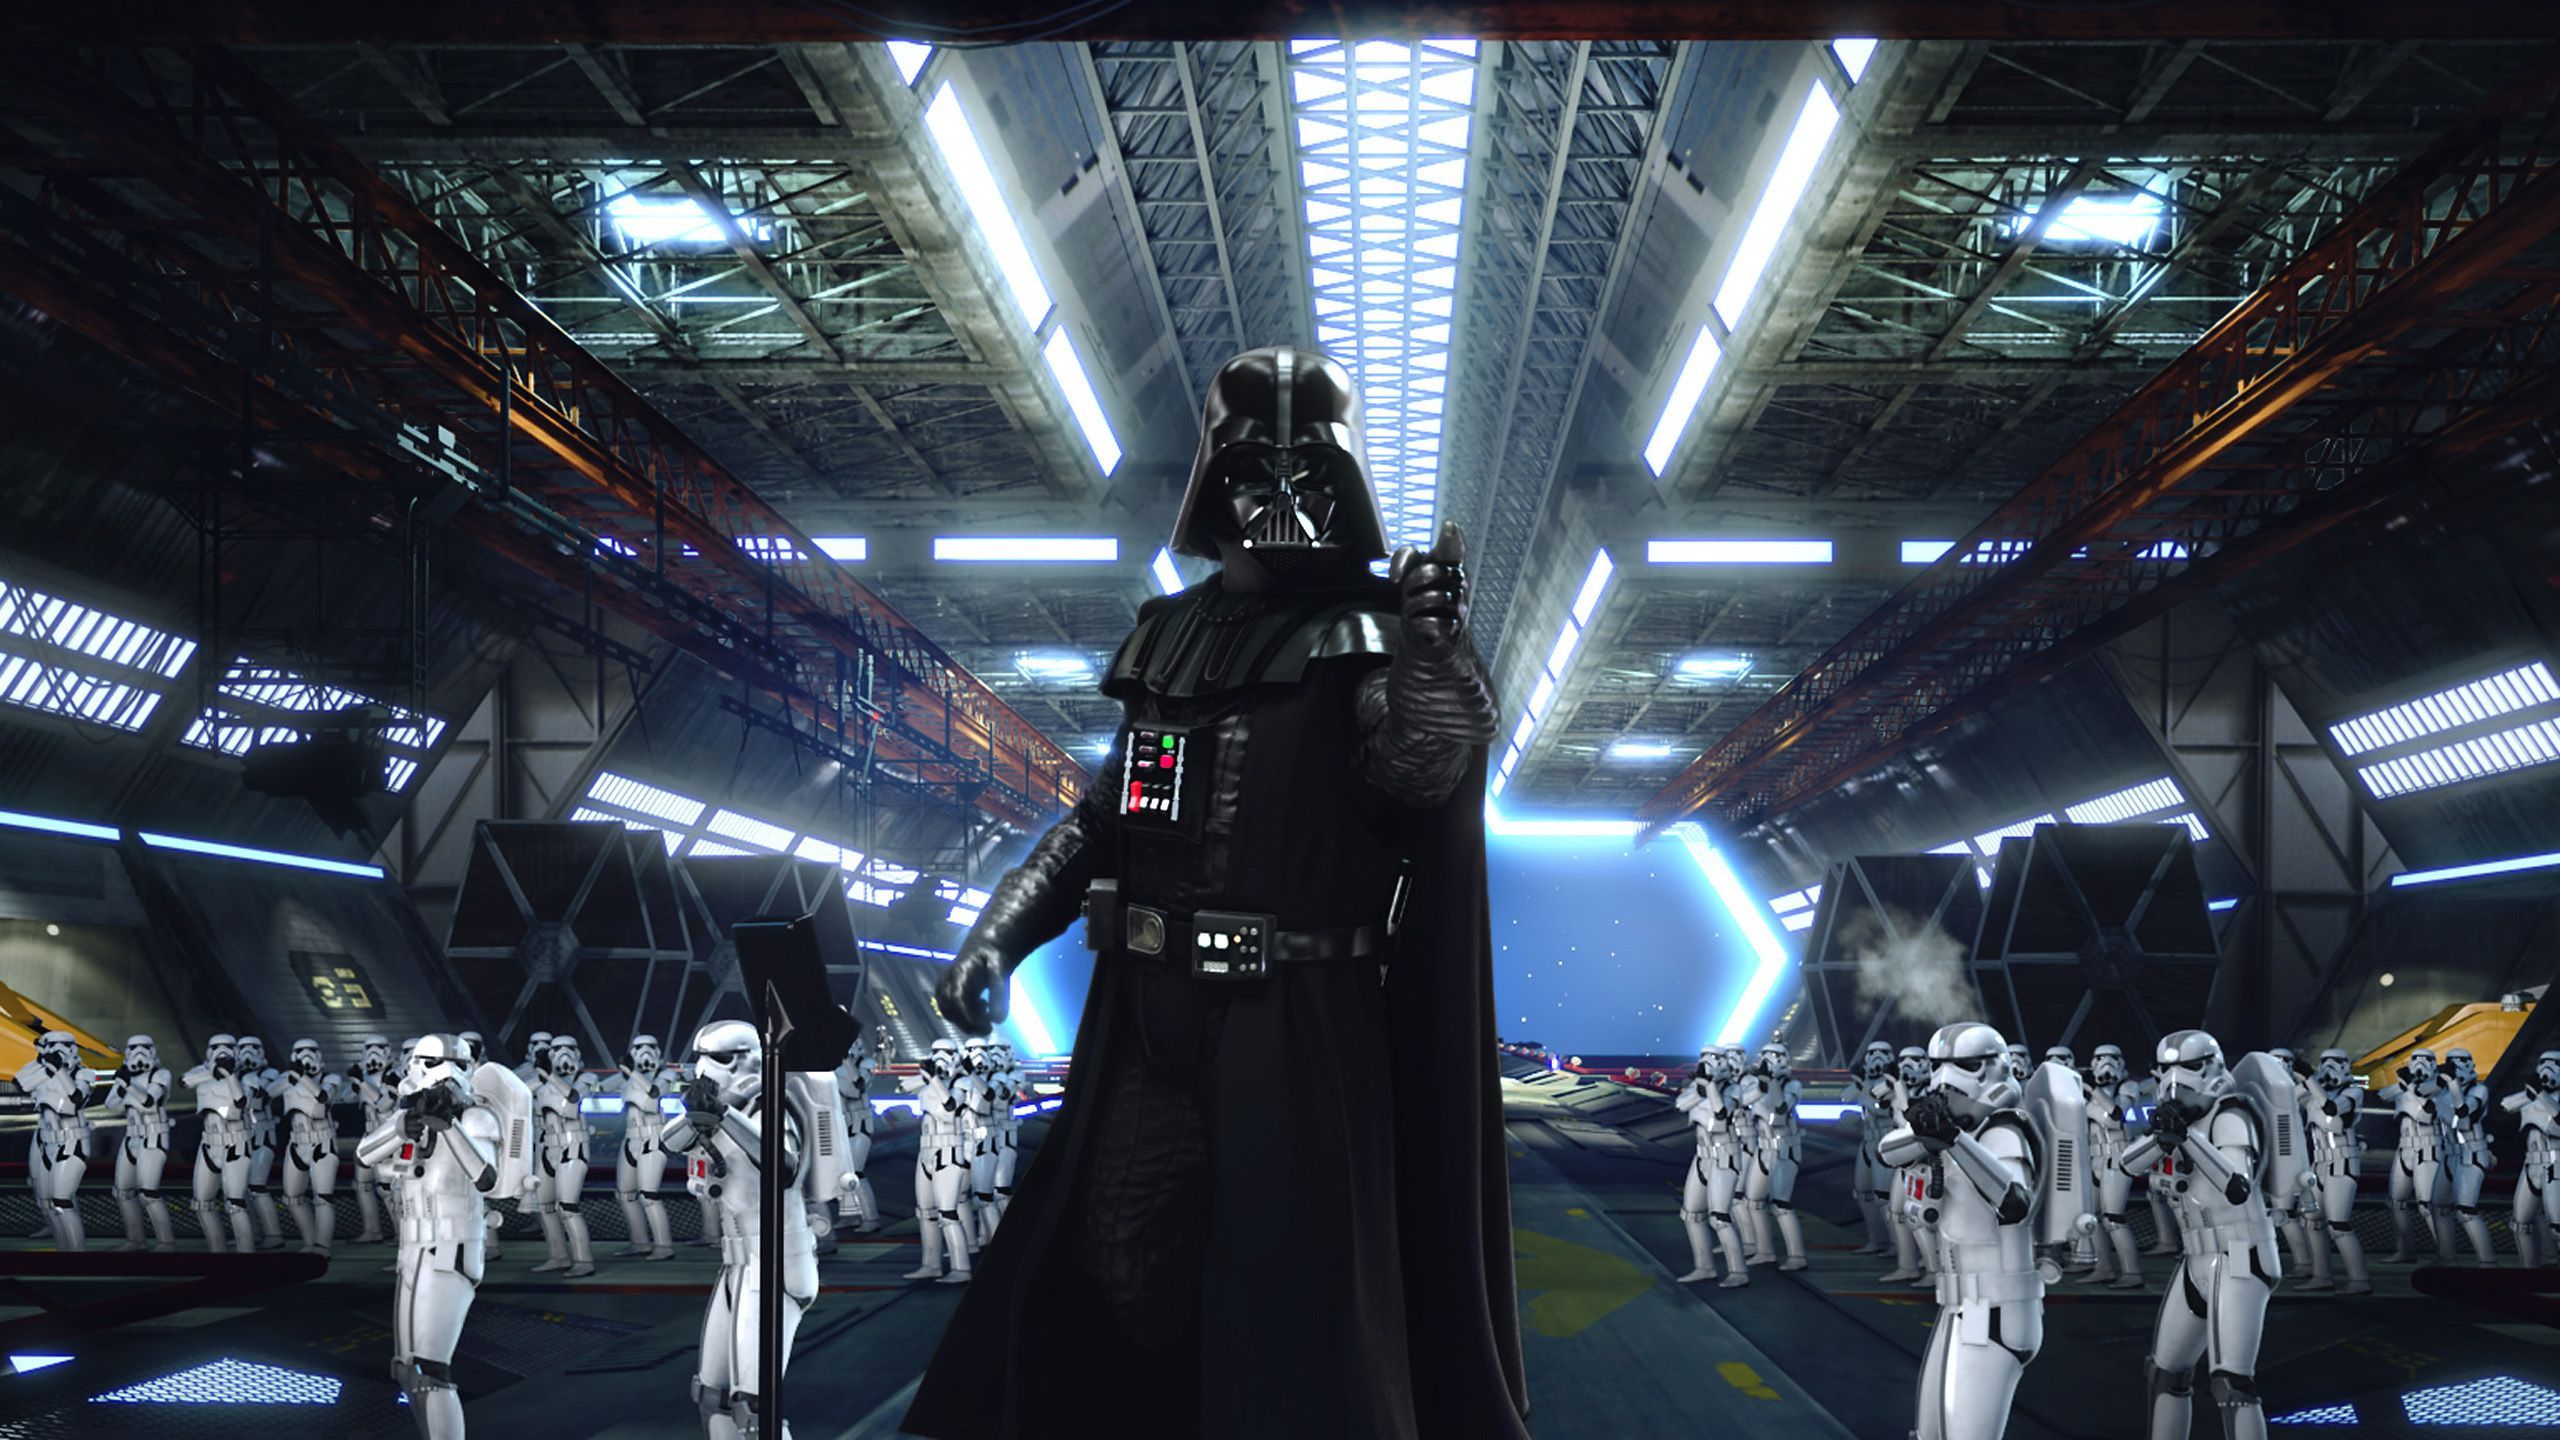 Darth Vader and Storm Troopers Star Wars Empire Strikes Back Ultra